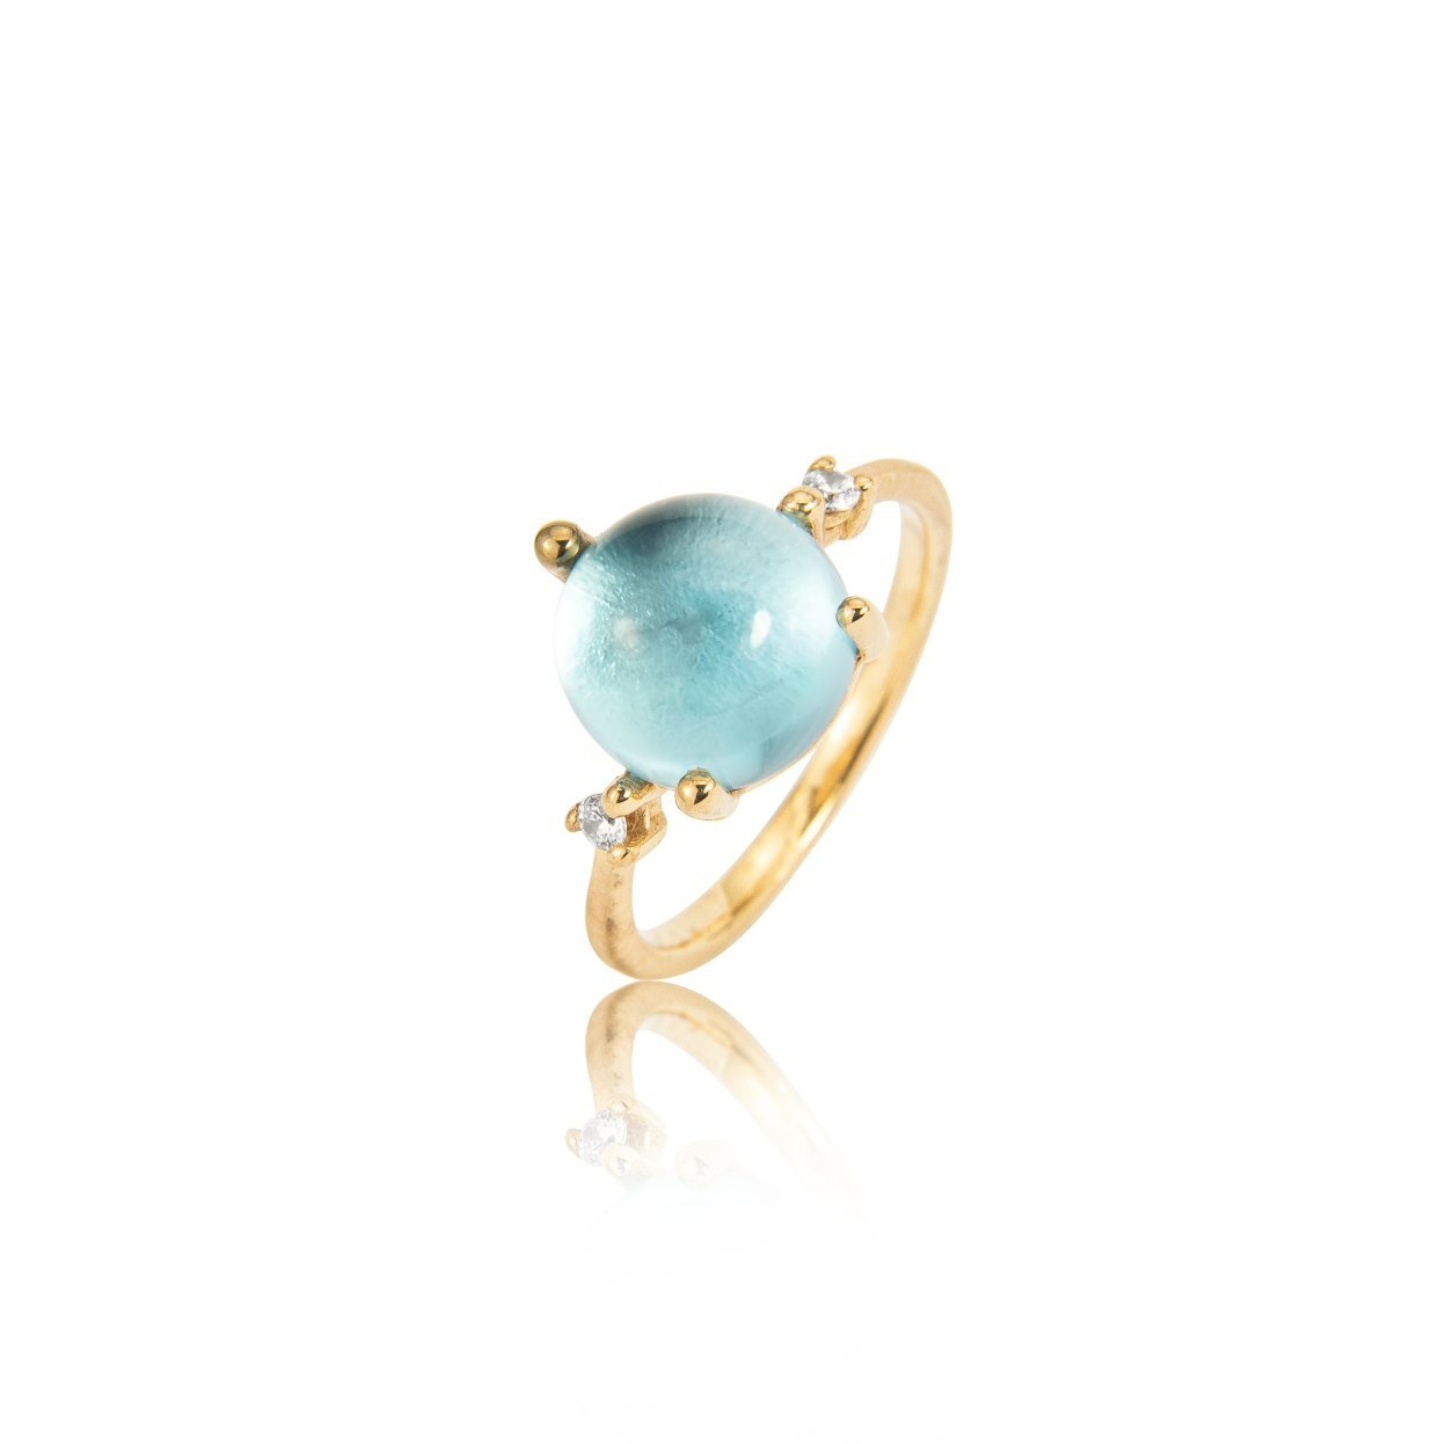 Stellini ring "big" in 585/- gold with topaz Swiss